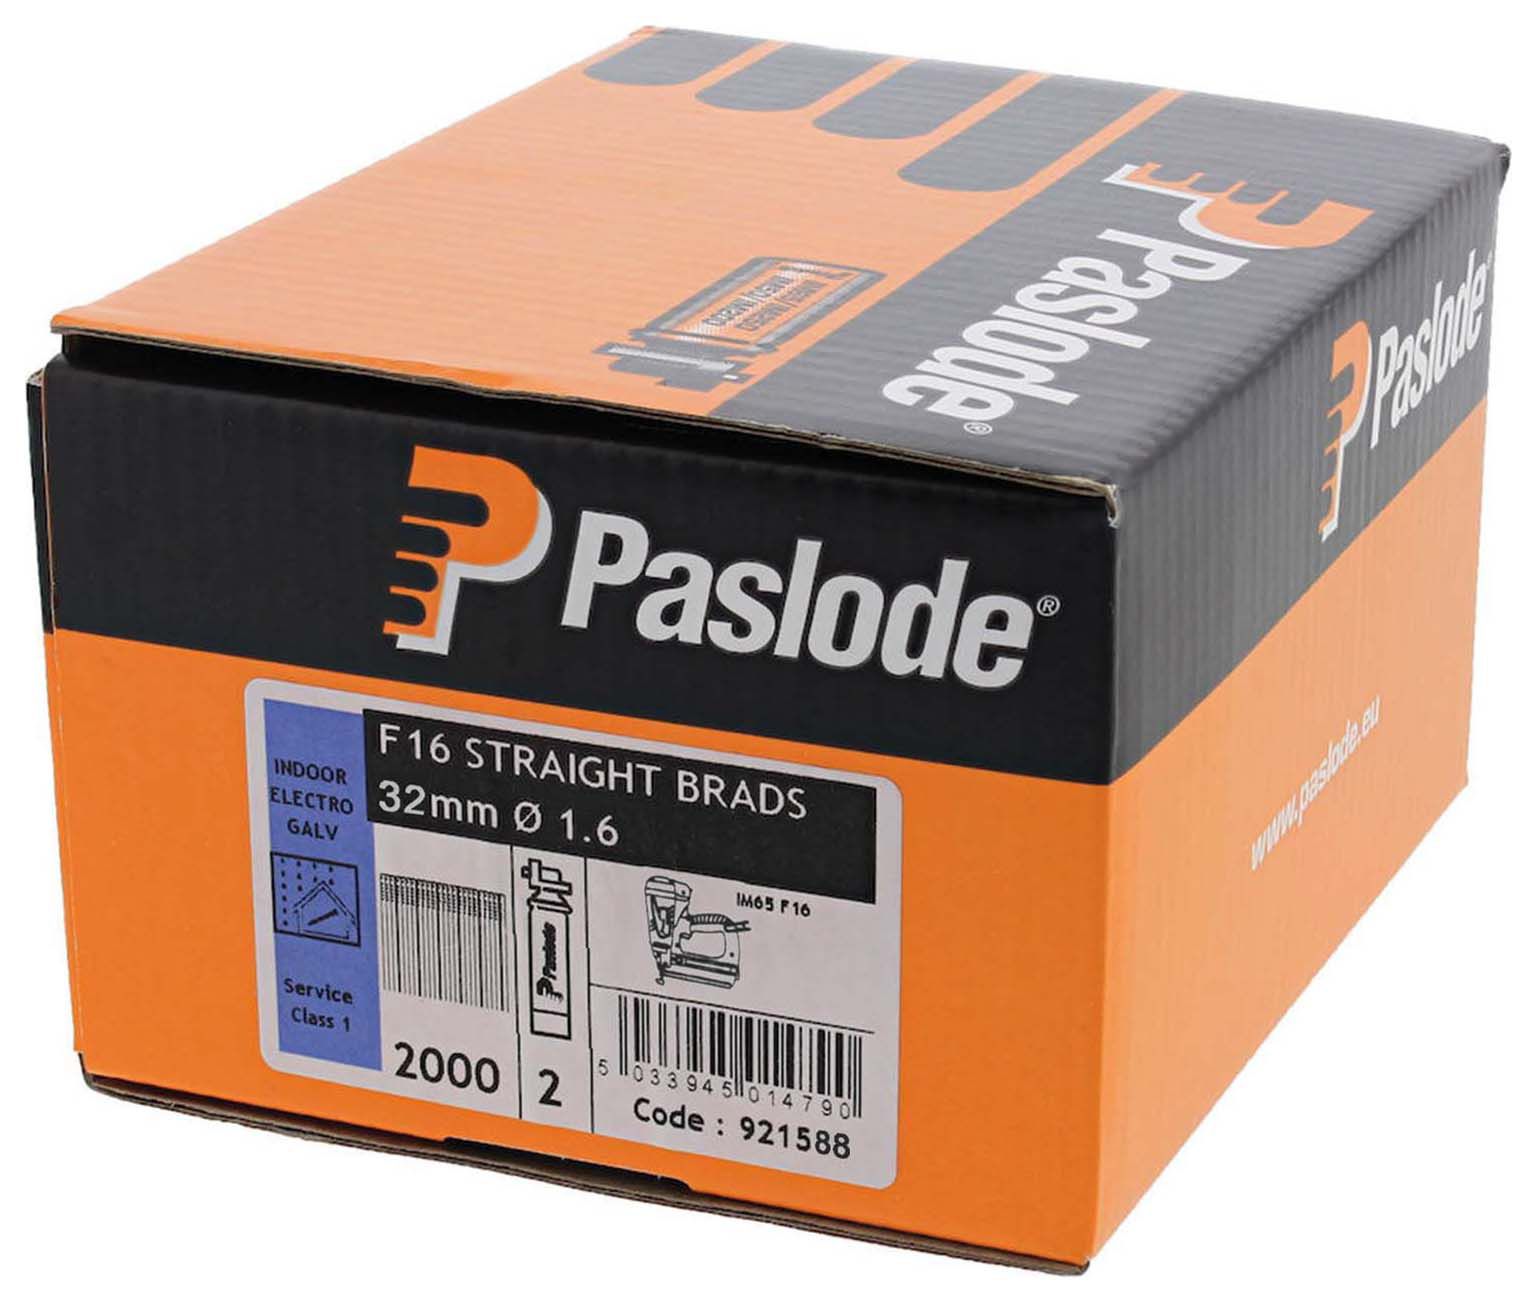 Image of Paslode 141267 3.1mm x 90mm Hot Dipped Galvanised Collated Box of 1100 Nails + 1 Fuel Cell